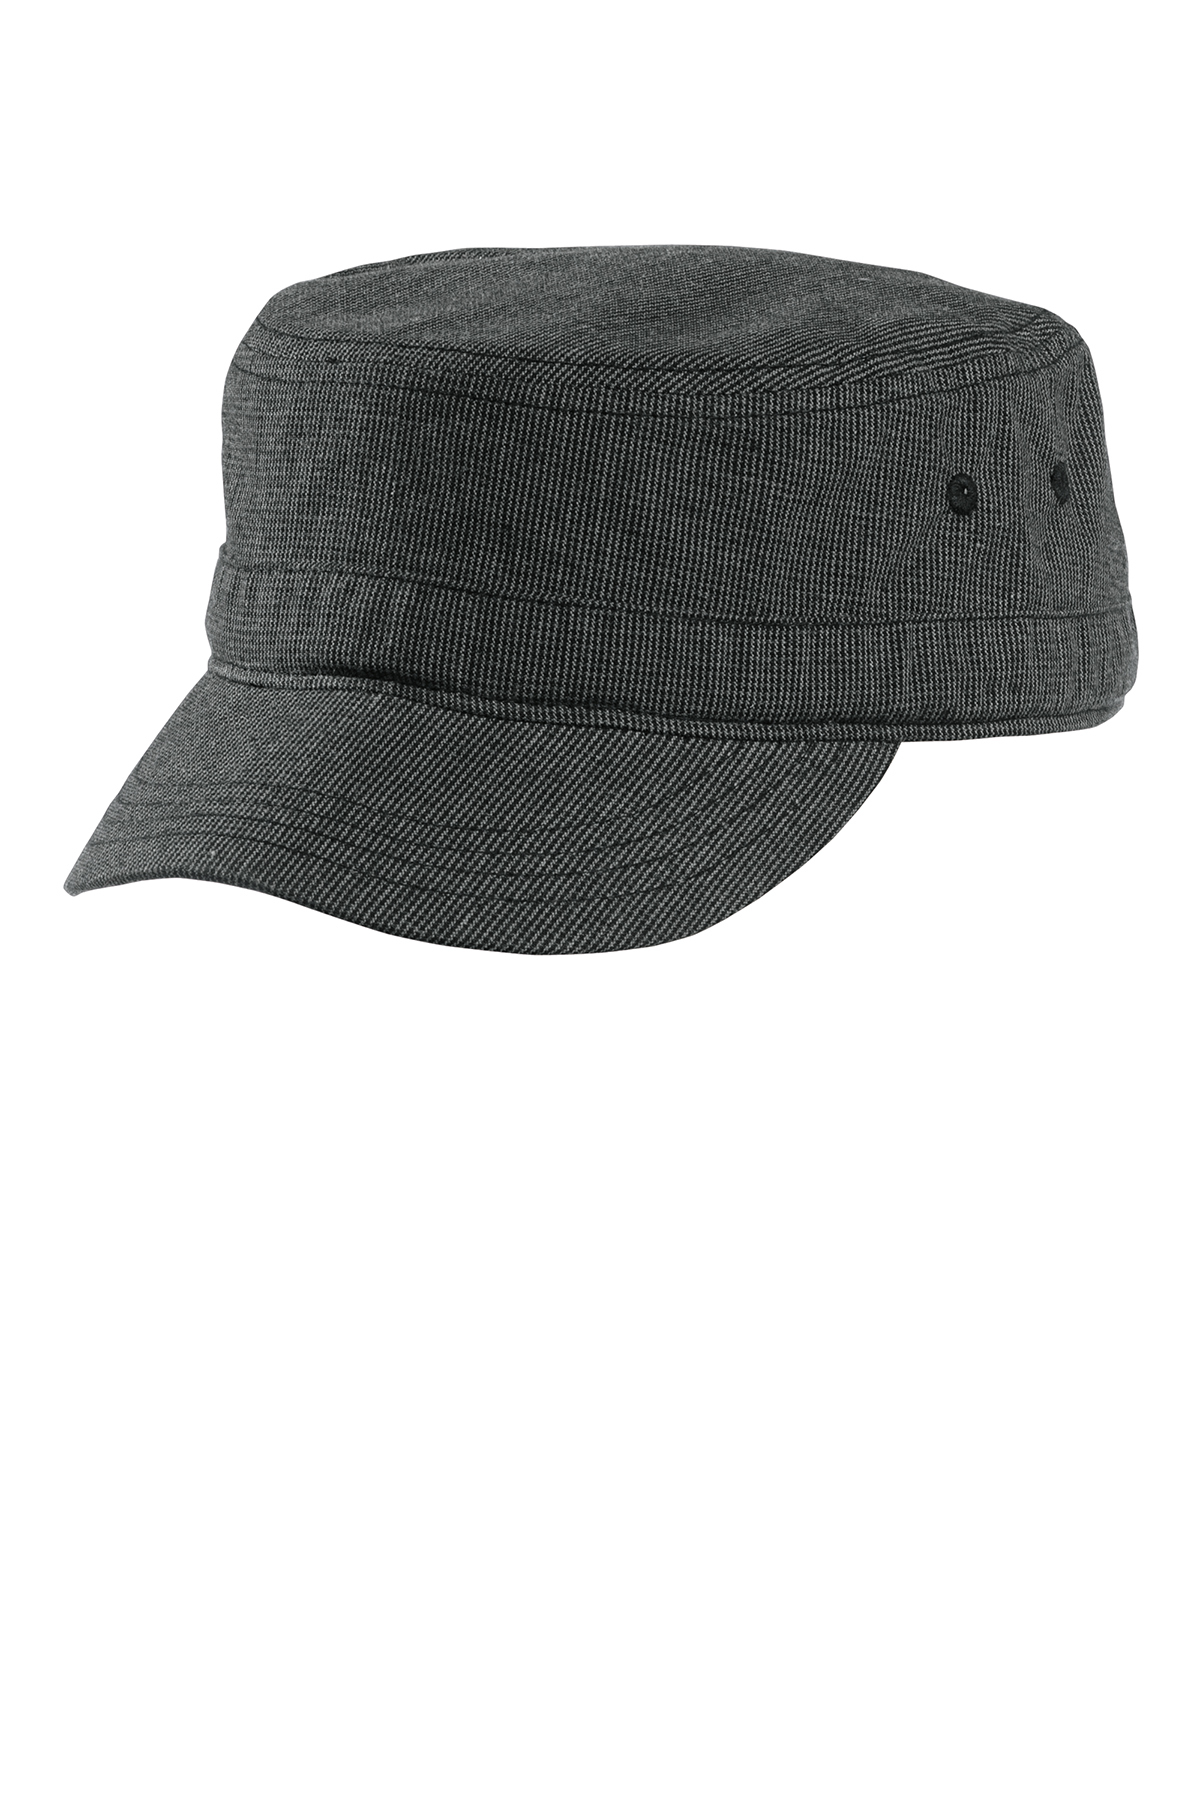 District Houndstooth Military Hat | Product | District